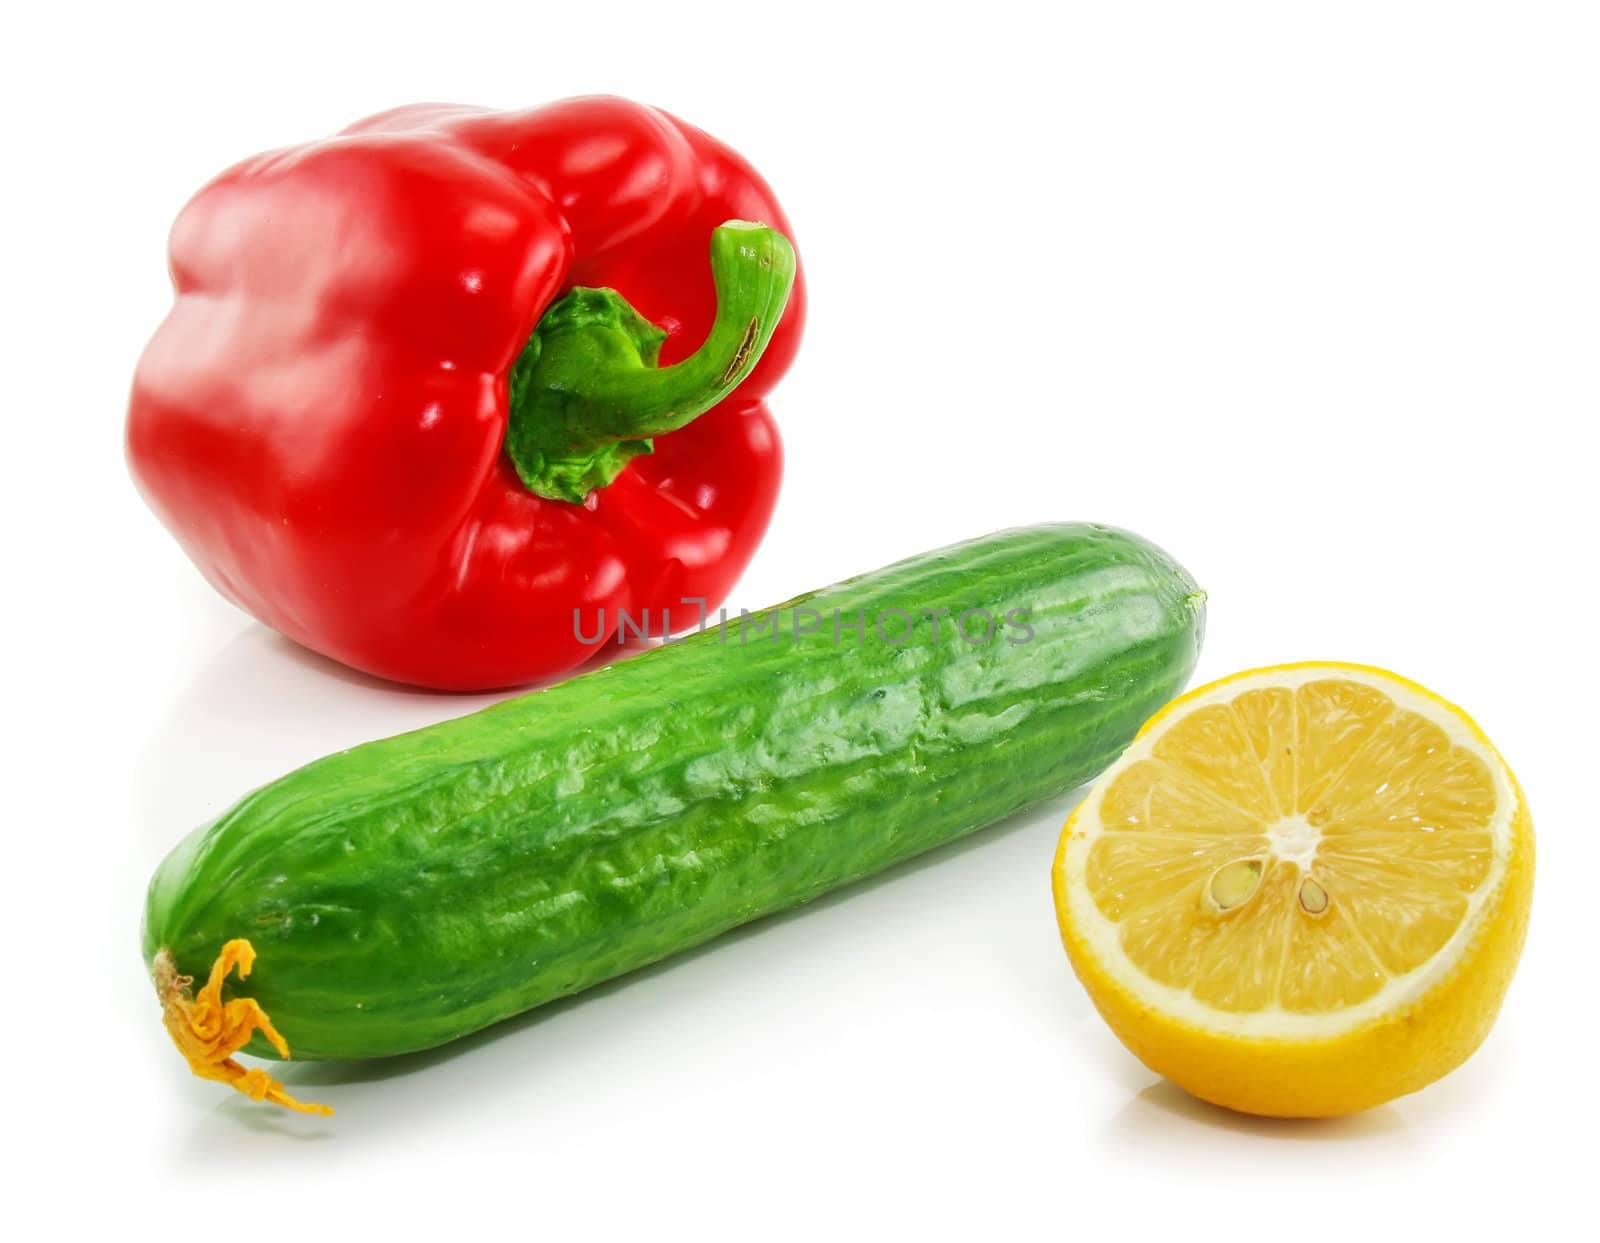 Green cucumber, red paprika and yellow lemon isolated on a white background